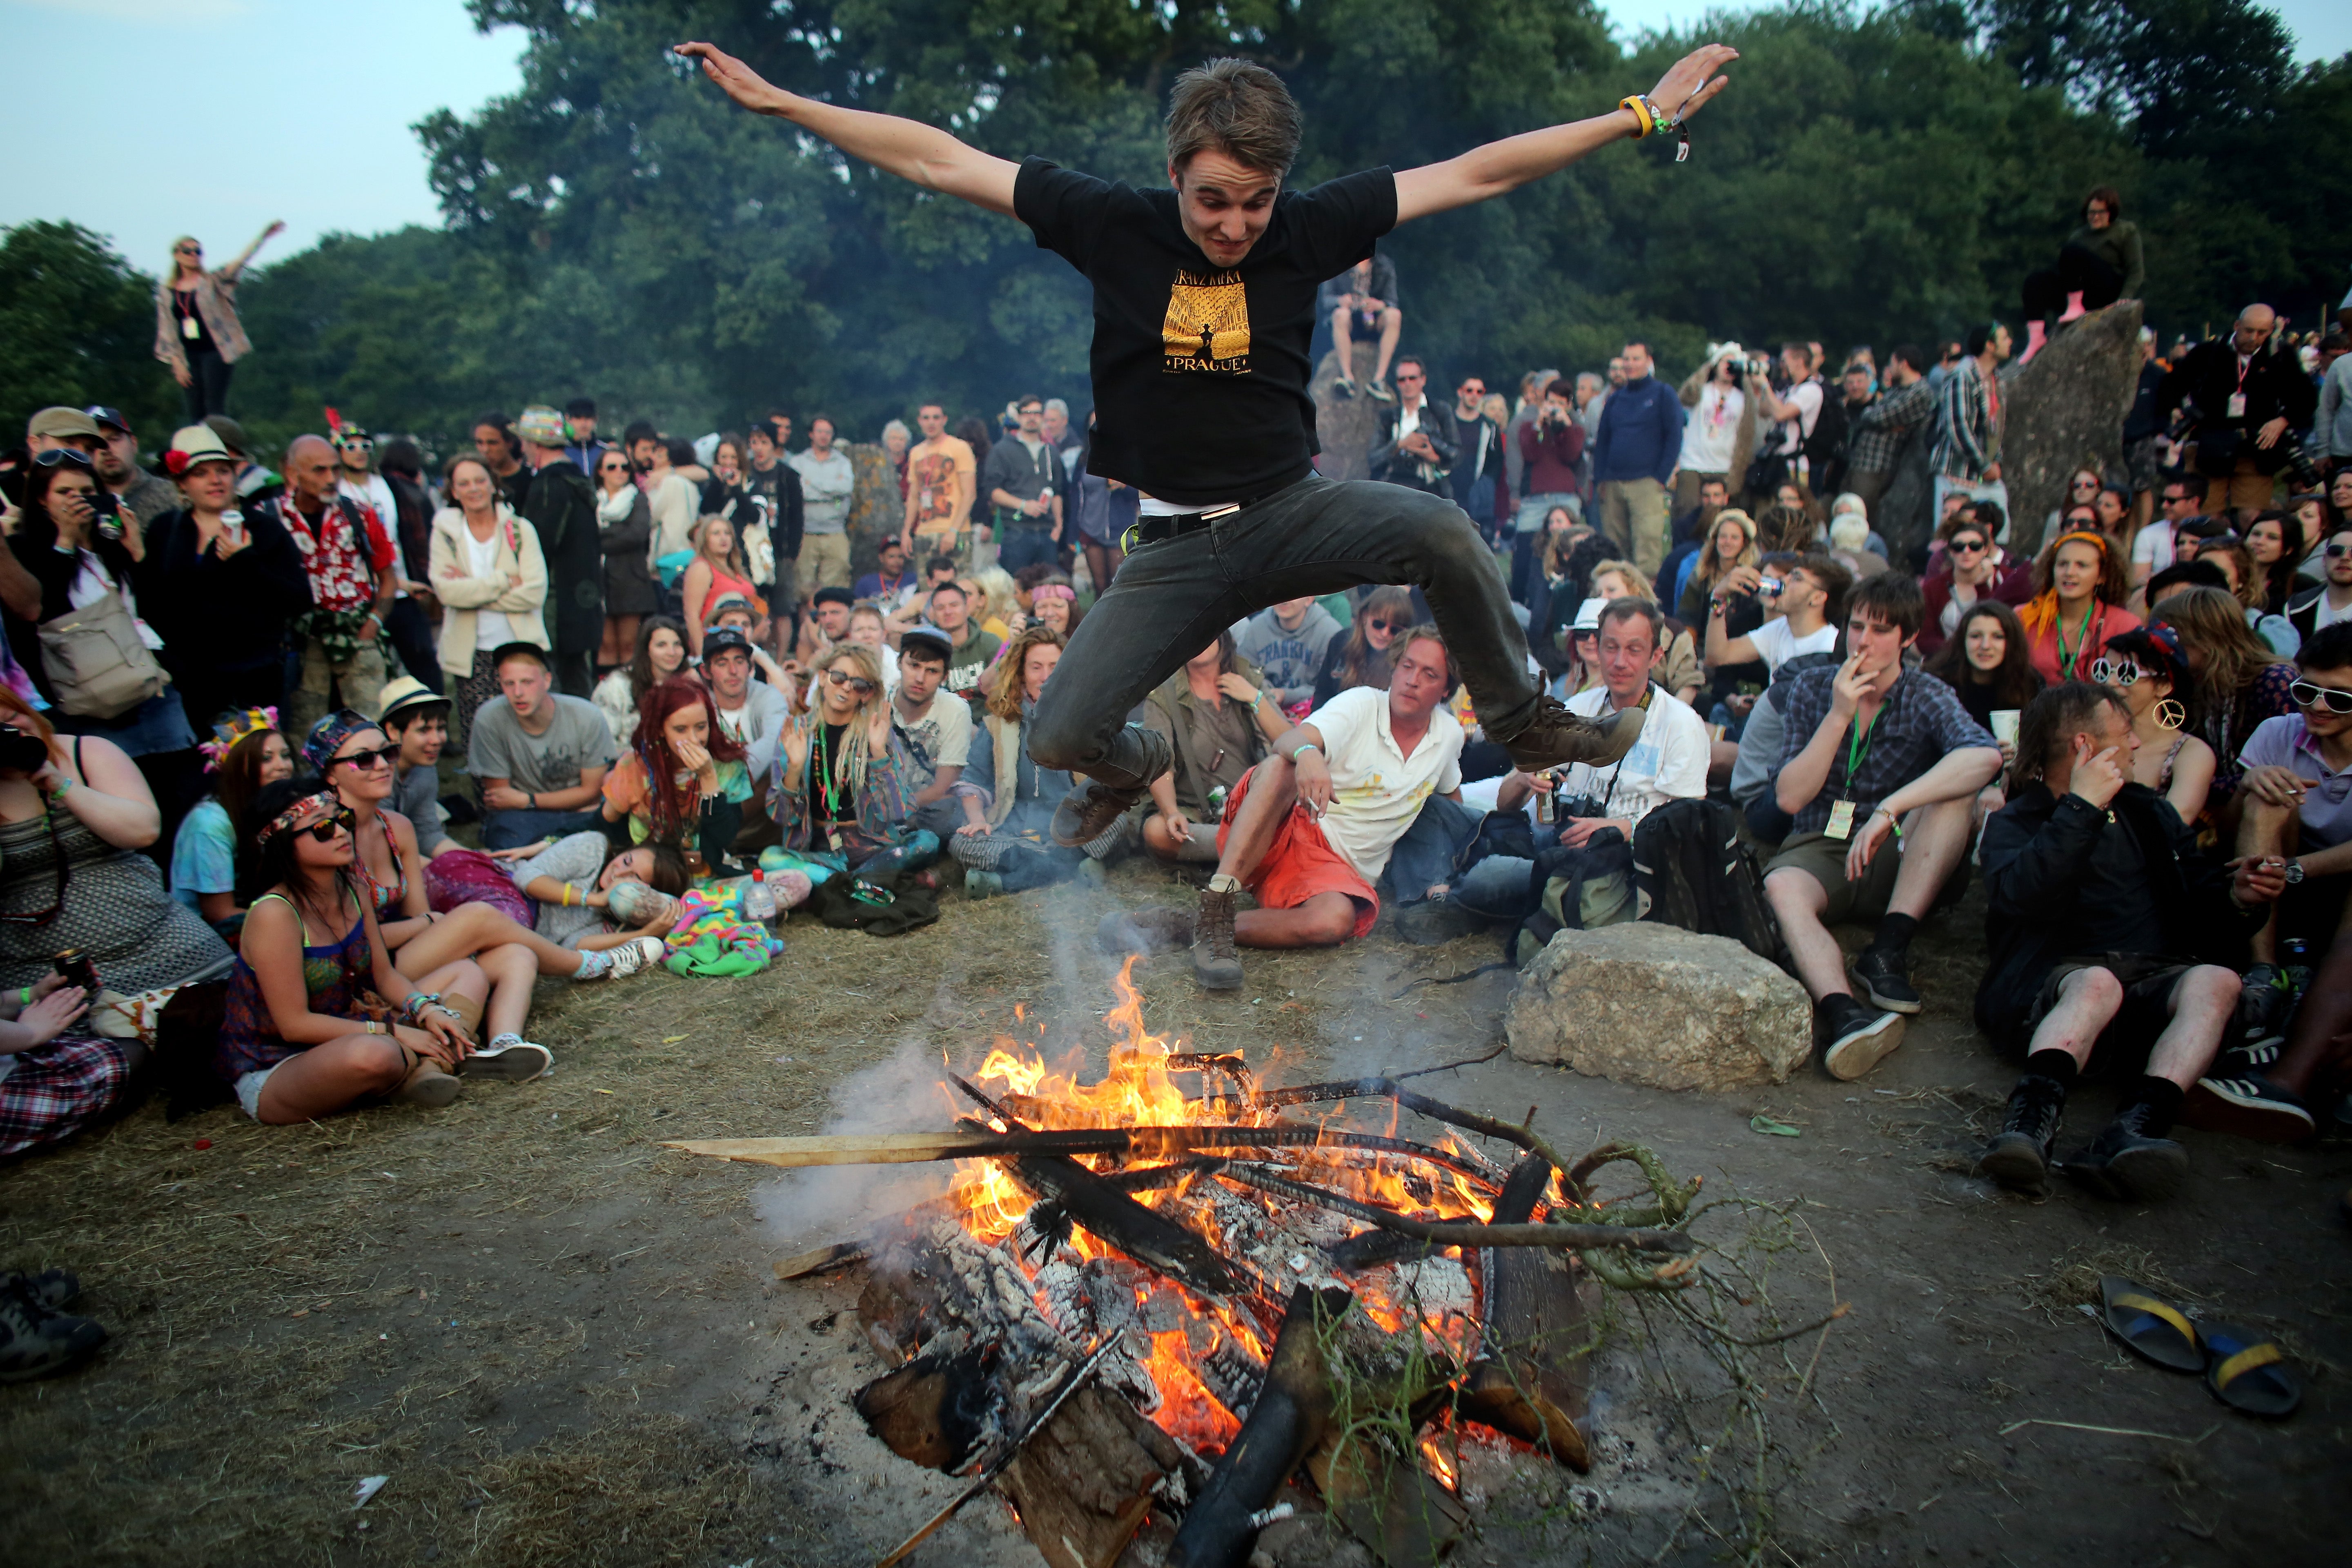 A man jumps over a fire in 2013